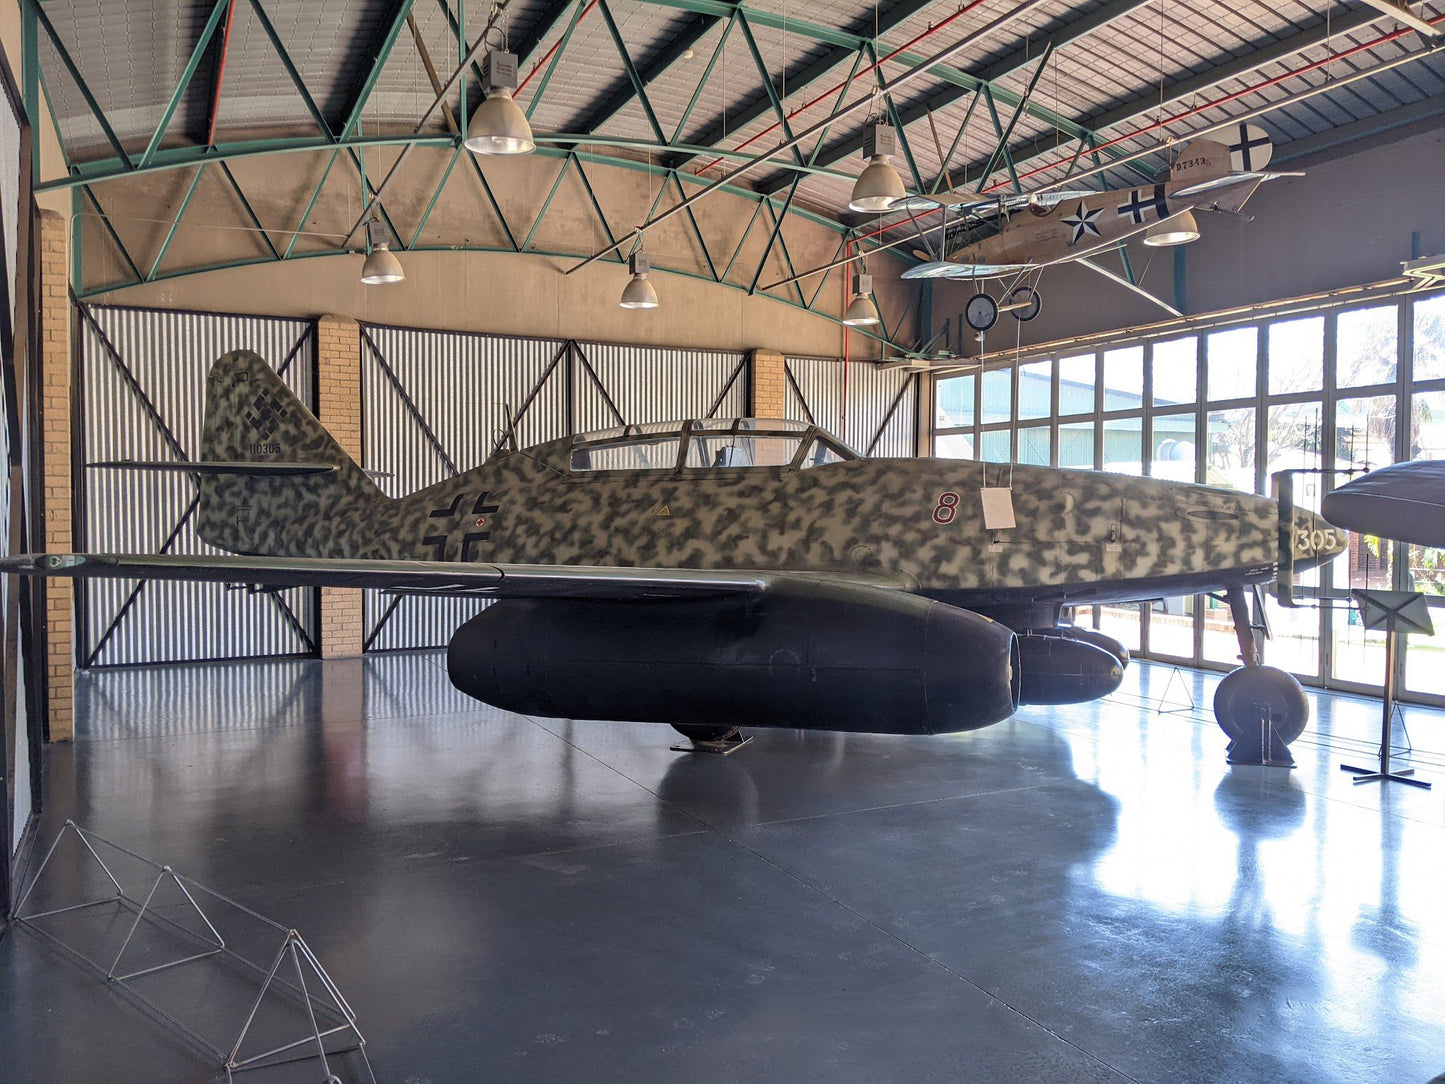  South African National Museum of Military History